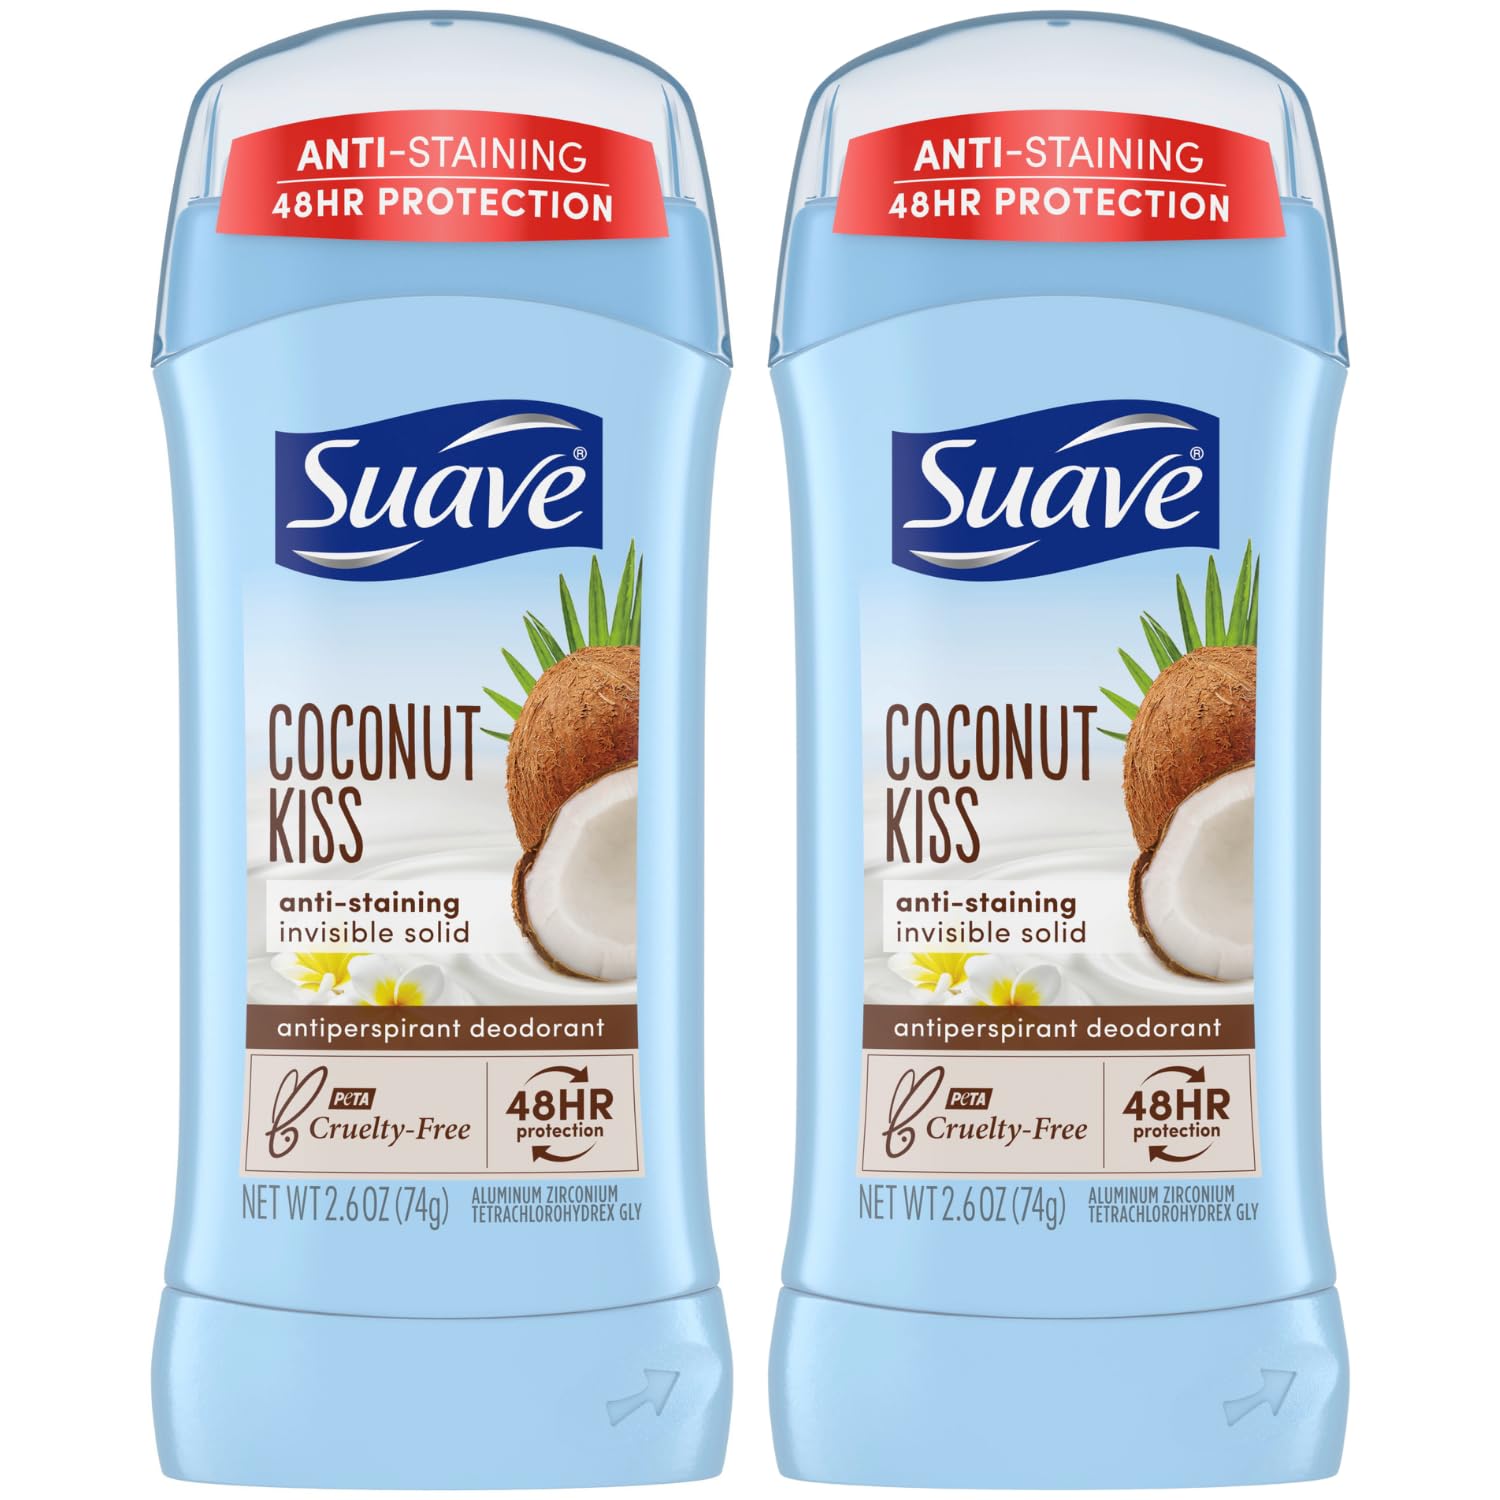 Suave Deodorant for Women, Coconut Kiss – Invisible Solid Antiperspirant Deodorant Stick, 48H Protection, Anti-Staining, Cruelty-Free, Scented, 2.6 Oz (Pack of 2)